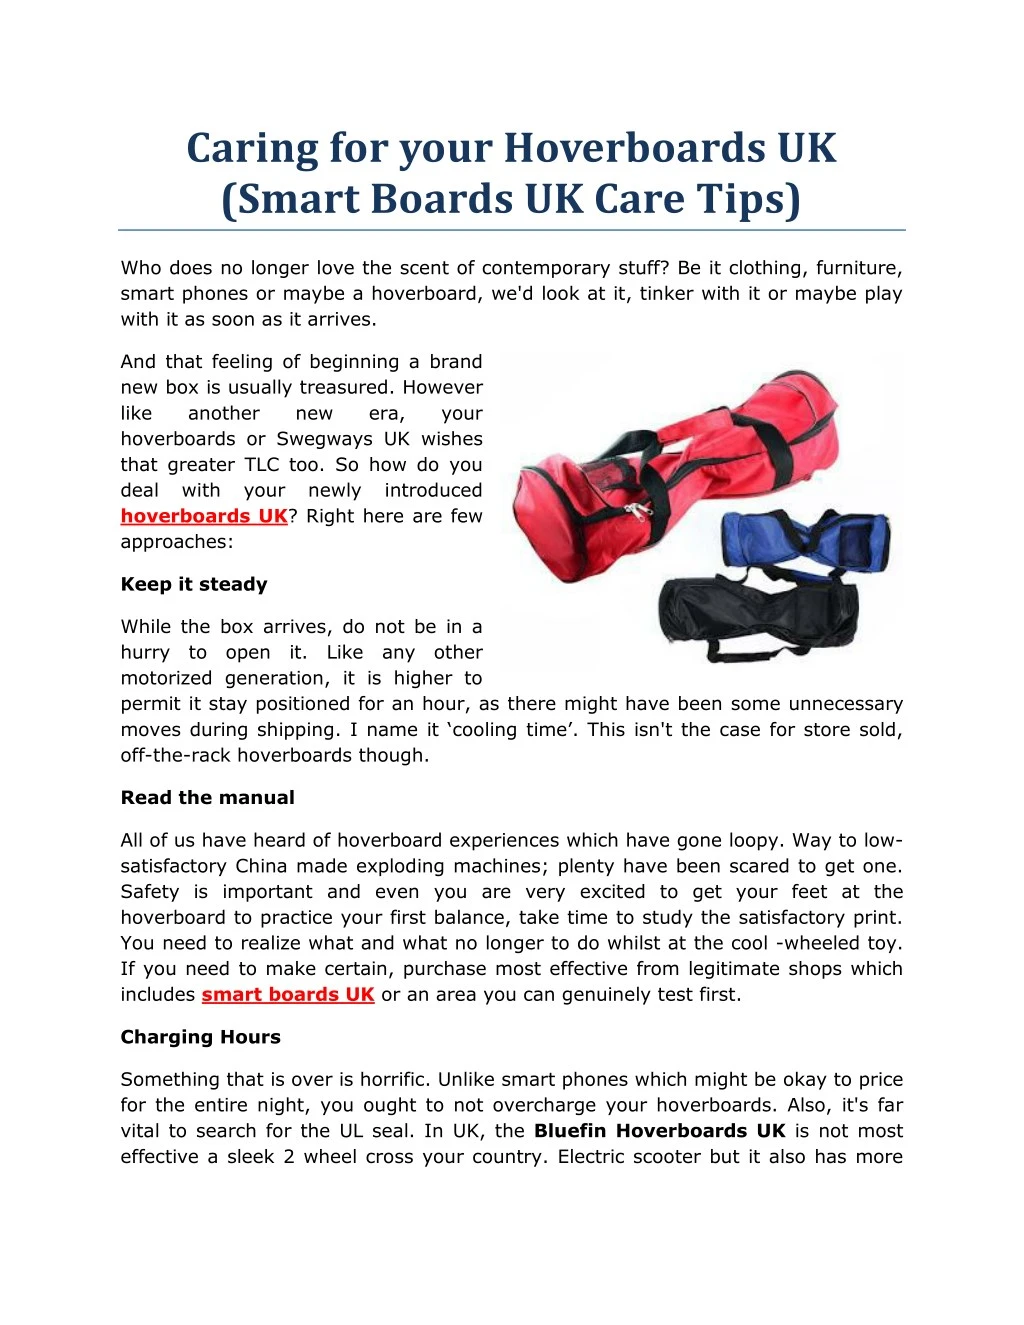 caring for your hoverboards uk smart boards